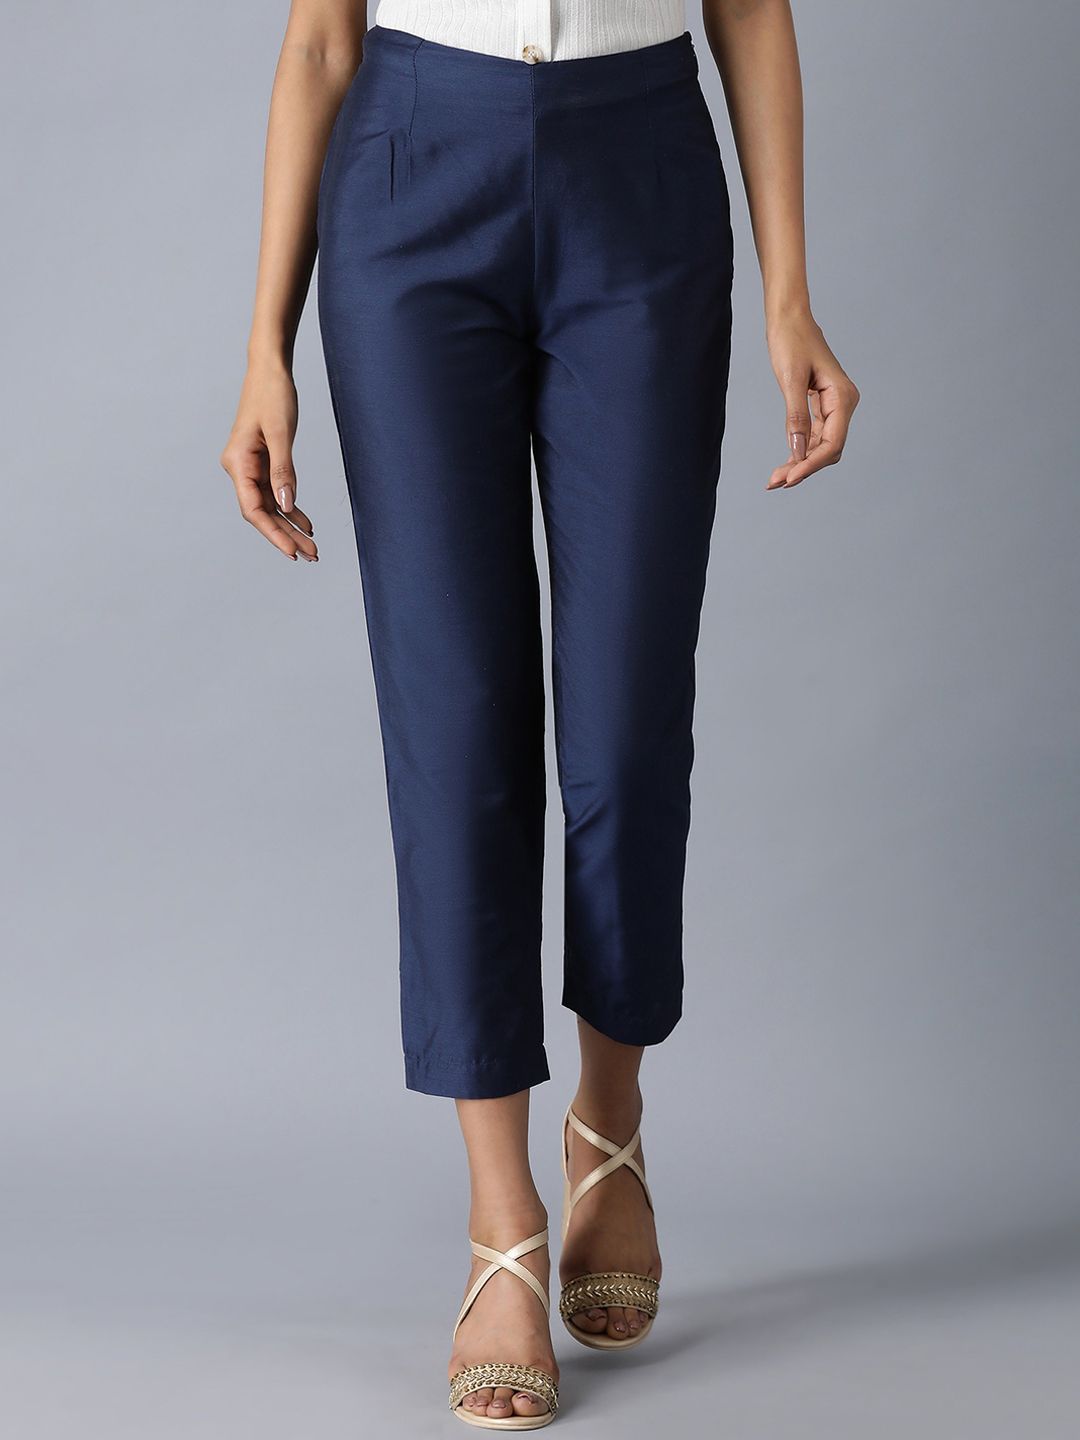 W Women Blue Slim Fit Solid Cigarette Trousers Price in India